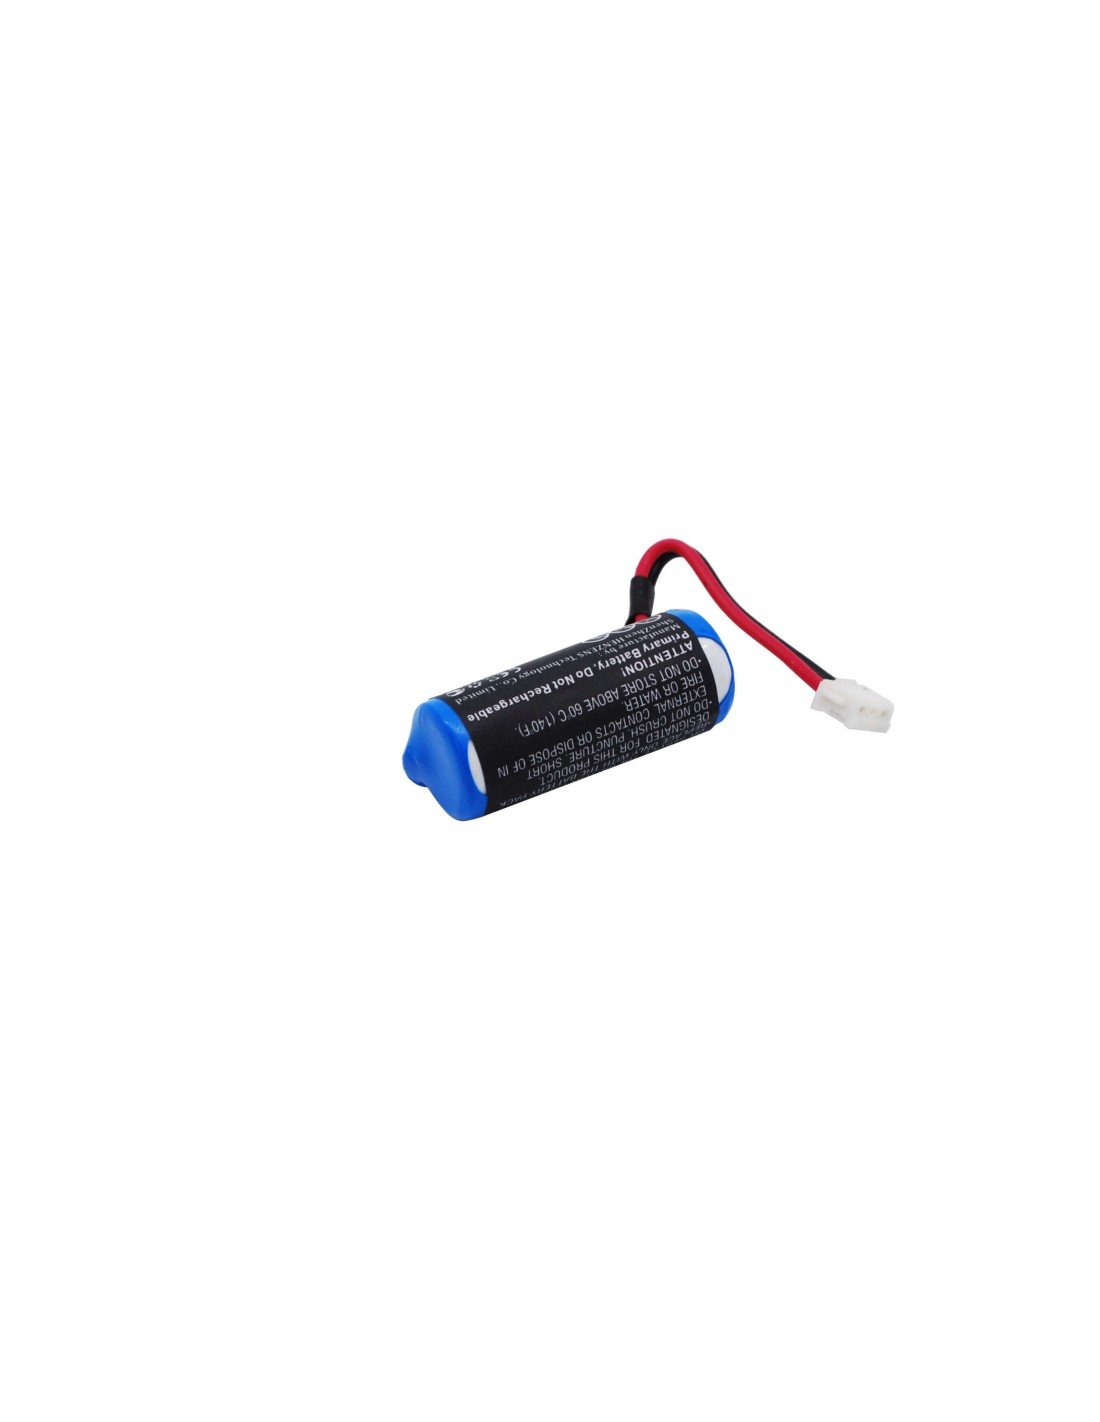 Battery for Mitsubishi Fx2nc Series Controllers 3.6V, 450mAh - 1.62Wh